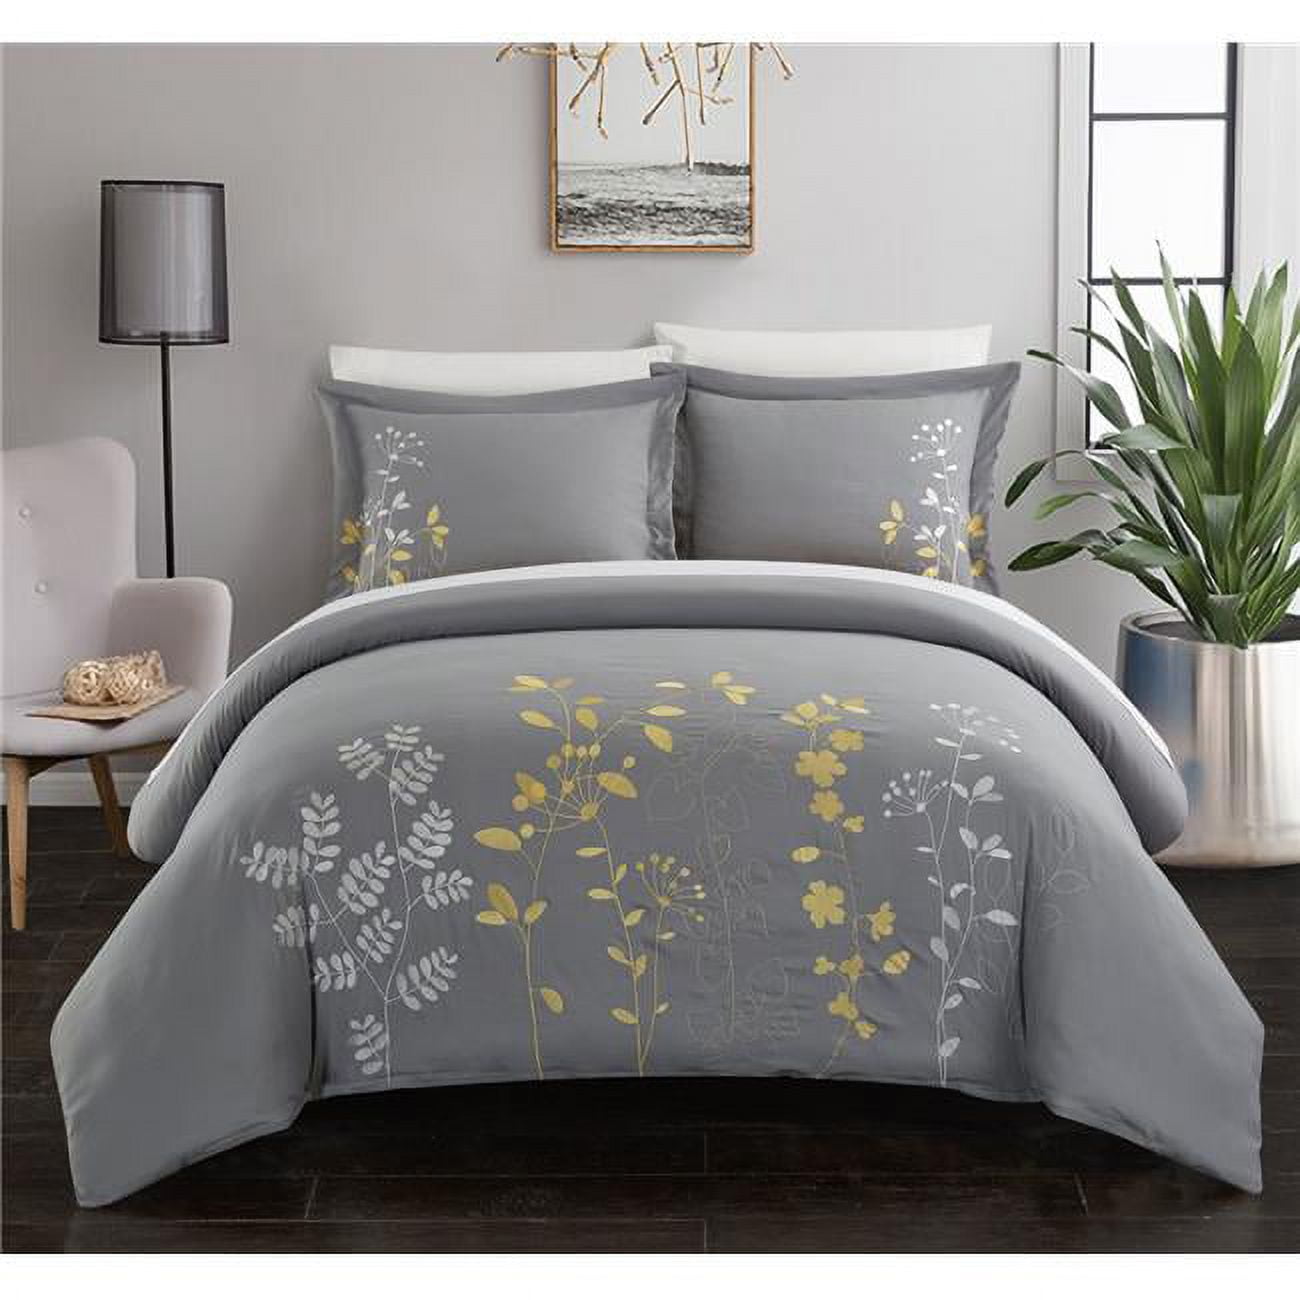 Queen Size Kylie Duvet Embroidered Floral Design Backing Zipper Closure Bedding - Decorative Pillow Shams Included, Yellow - 7 Piece